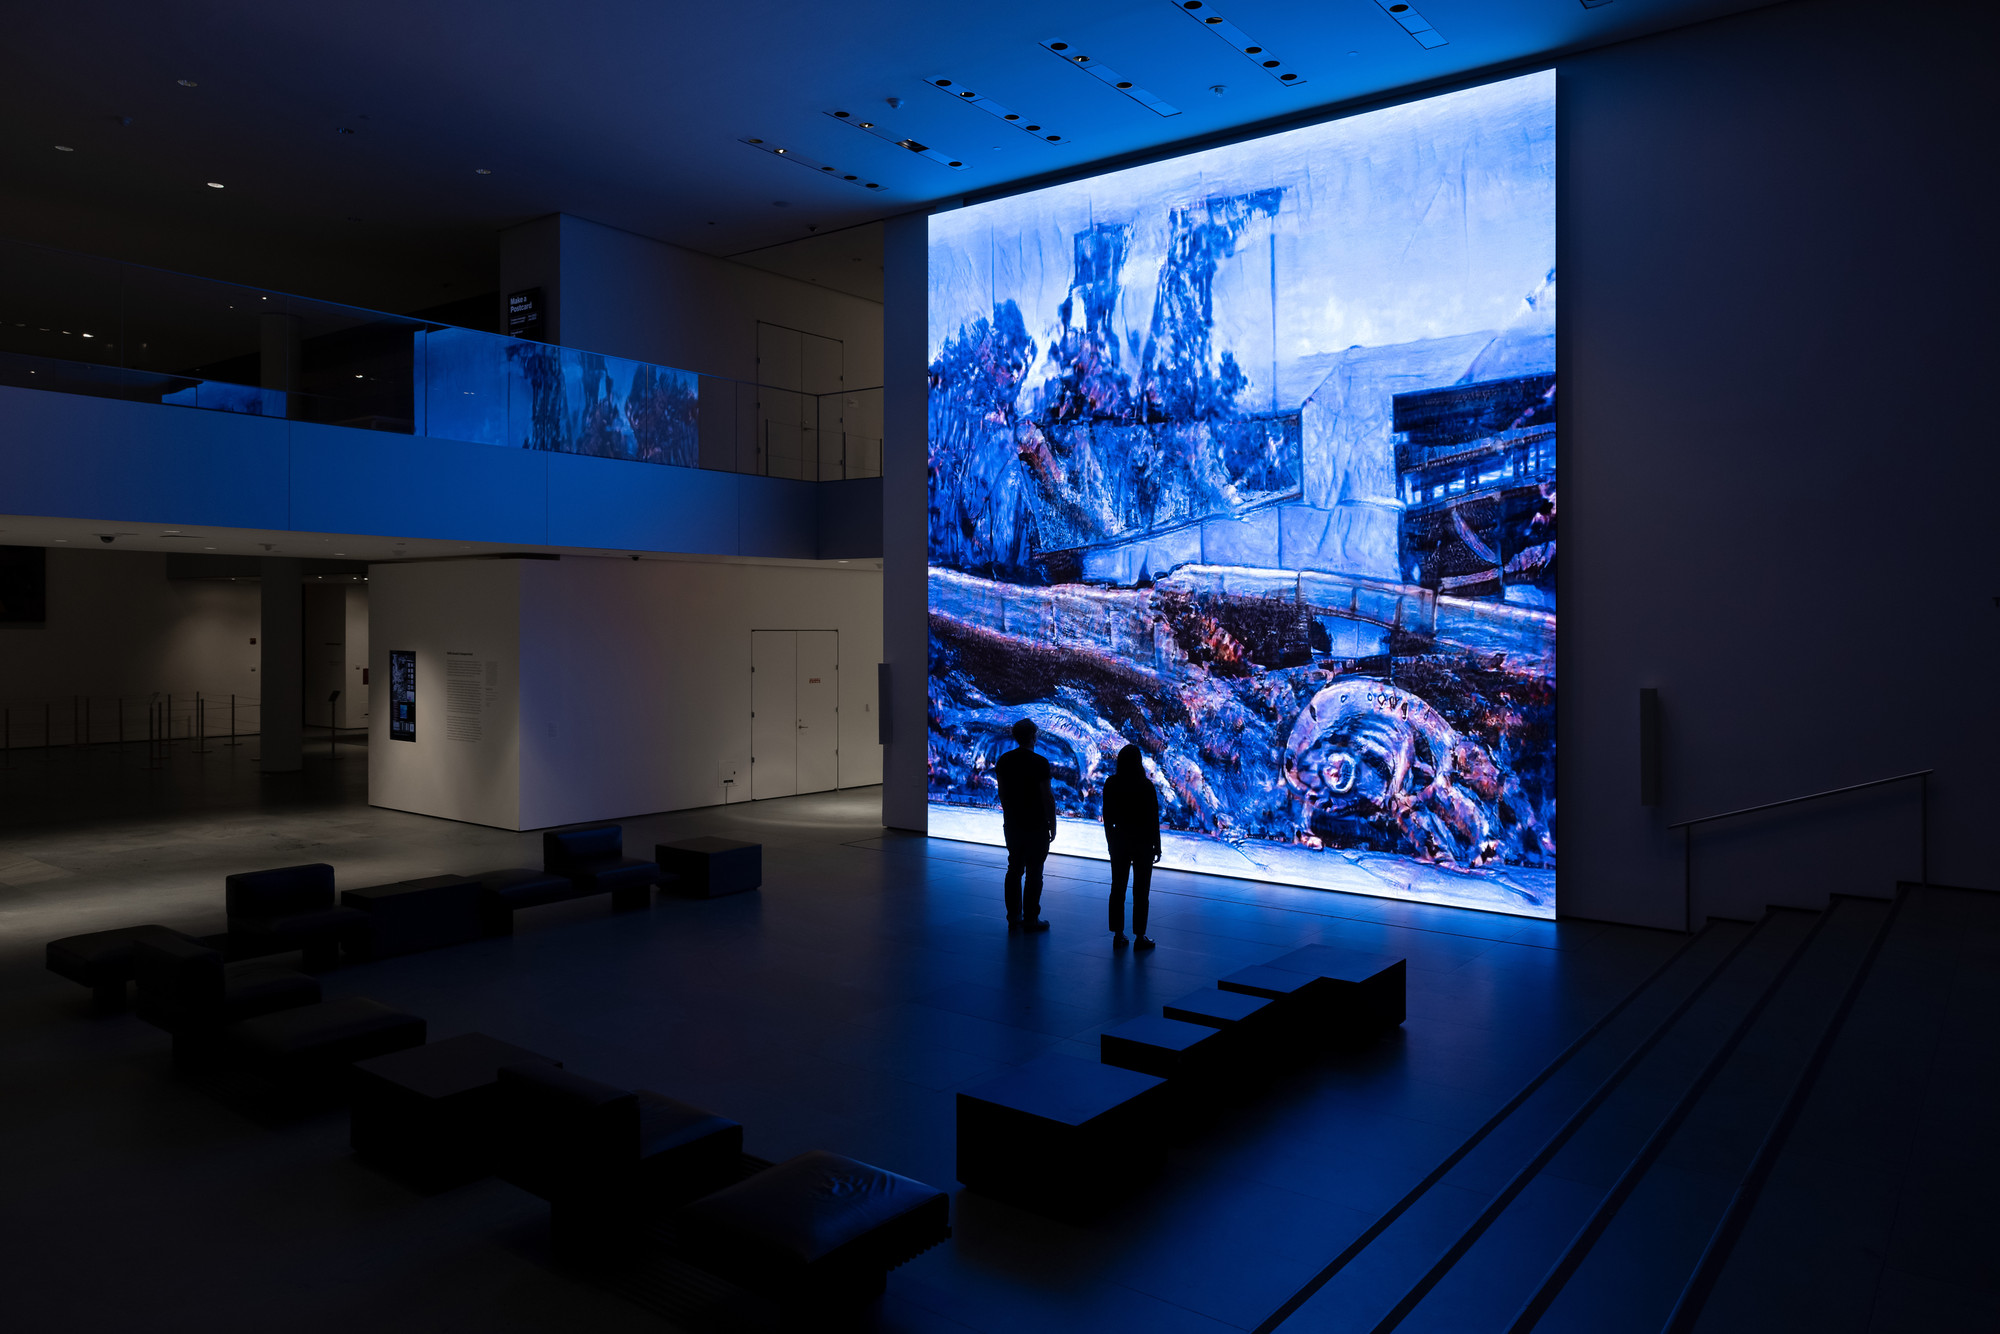 Installation view of the exhibition "Refik Anadol Unsupervised" MoMA